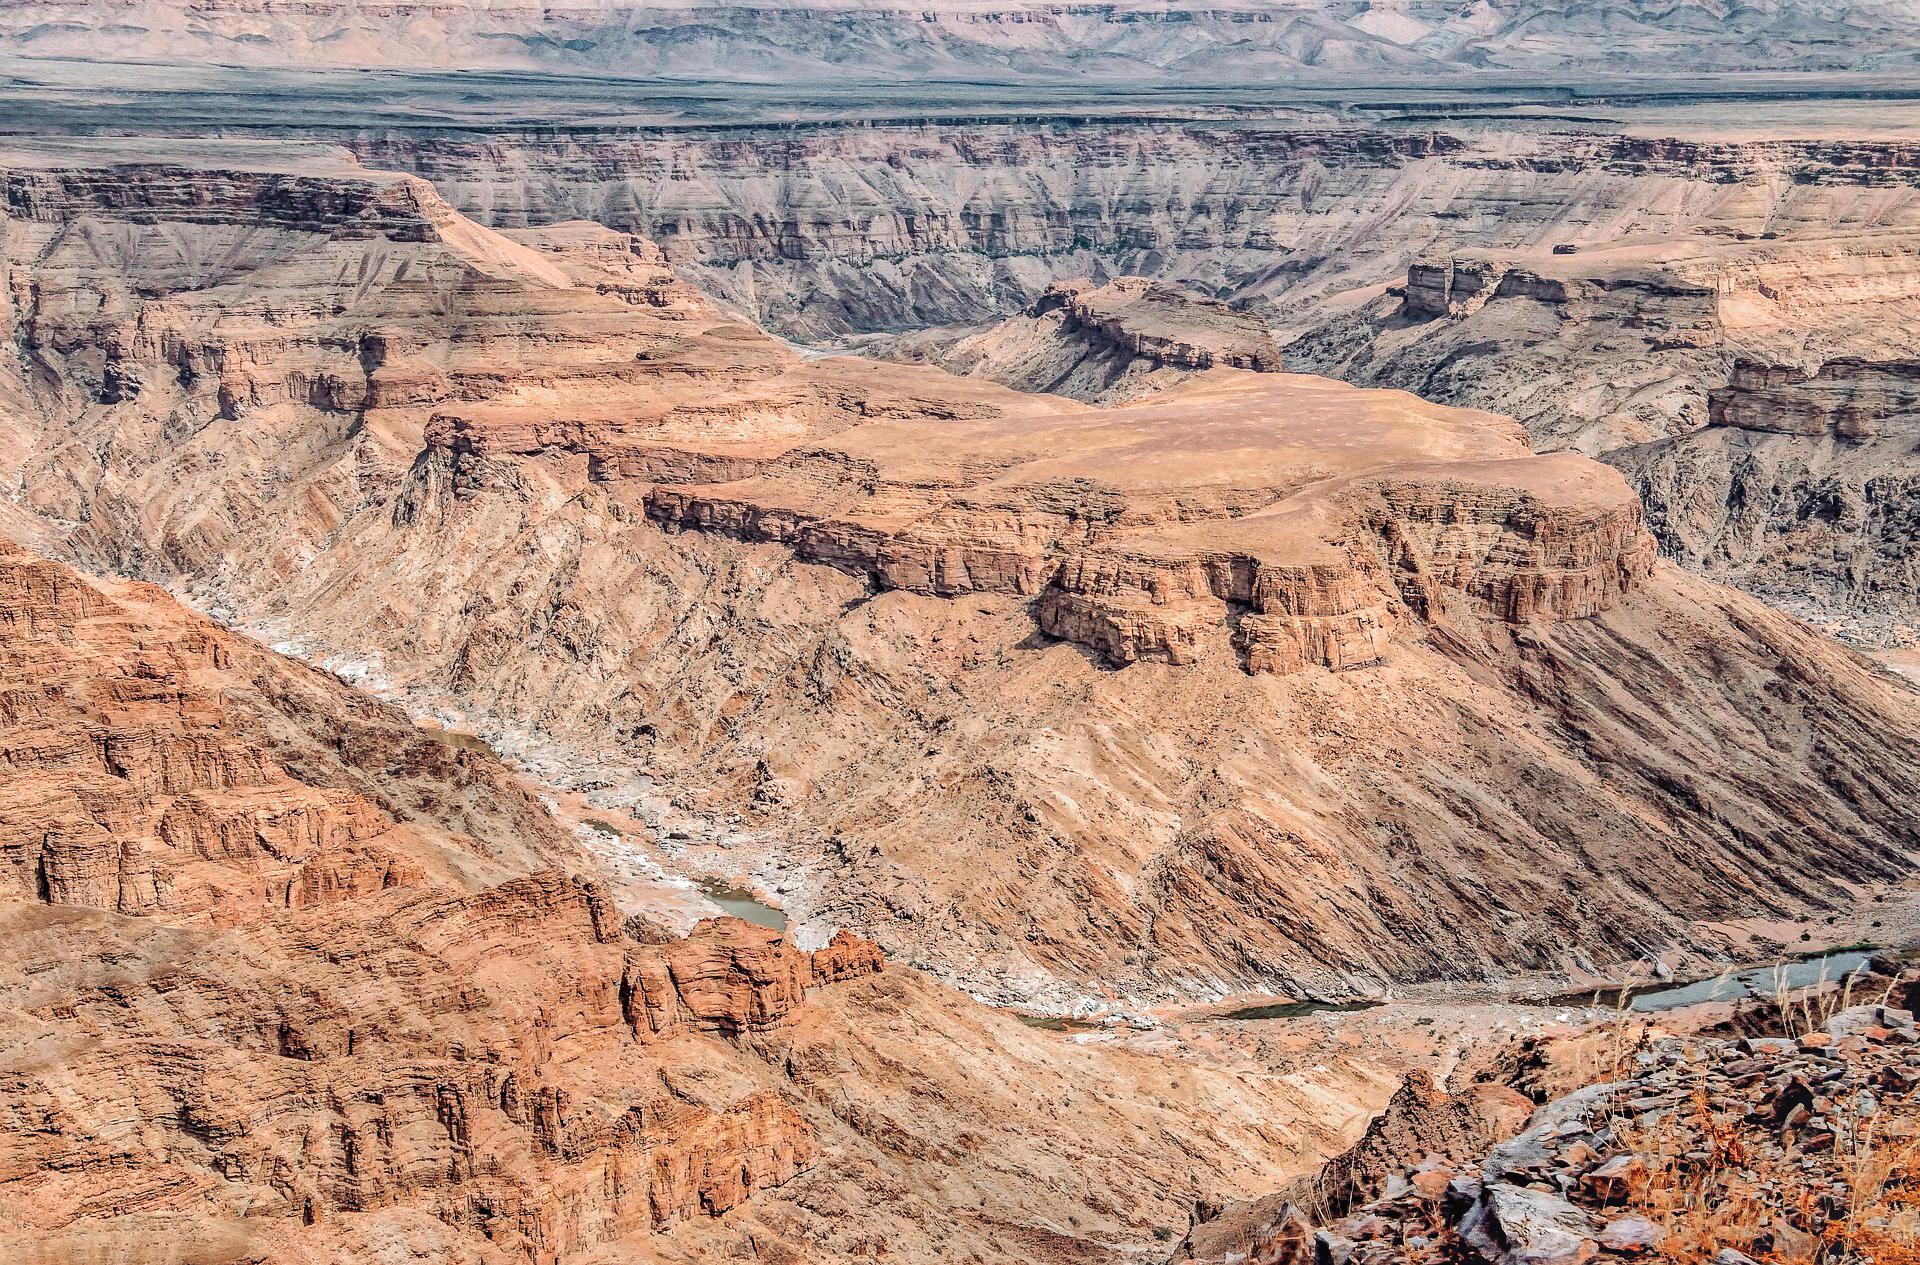 looking down into fish hook canyon, a red canyon deeply carved by a river